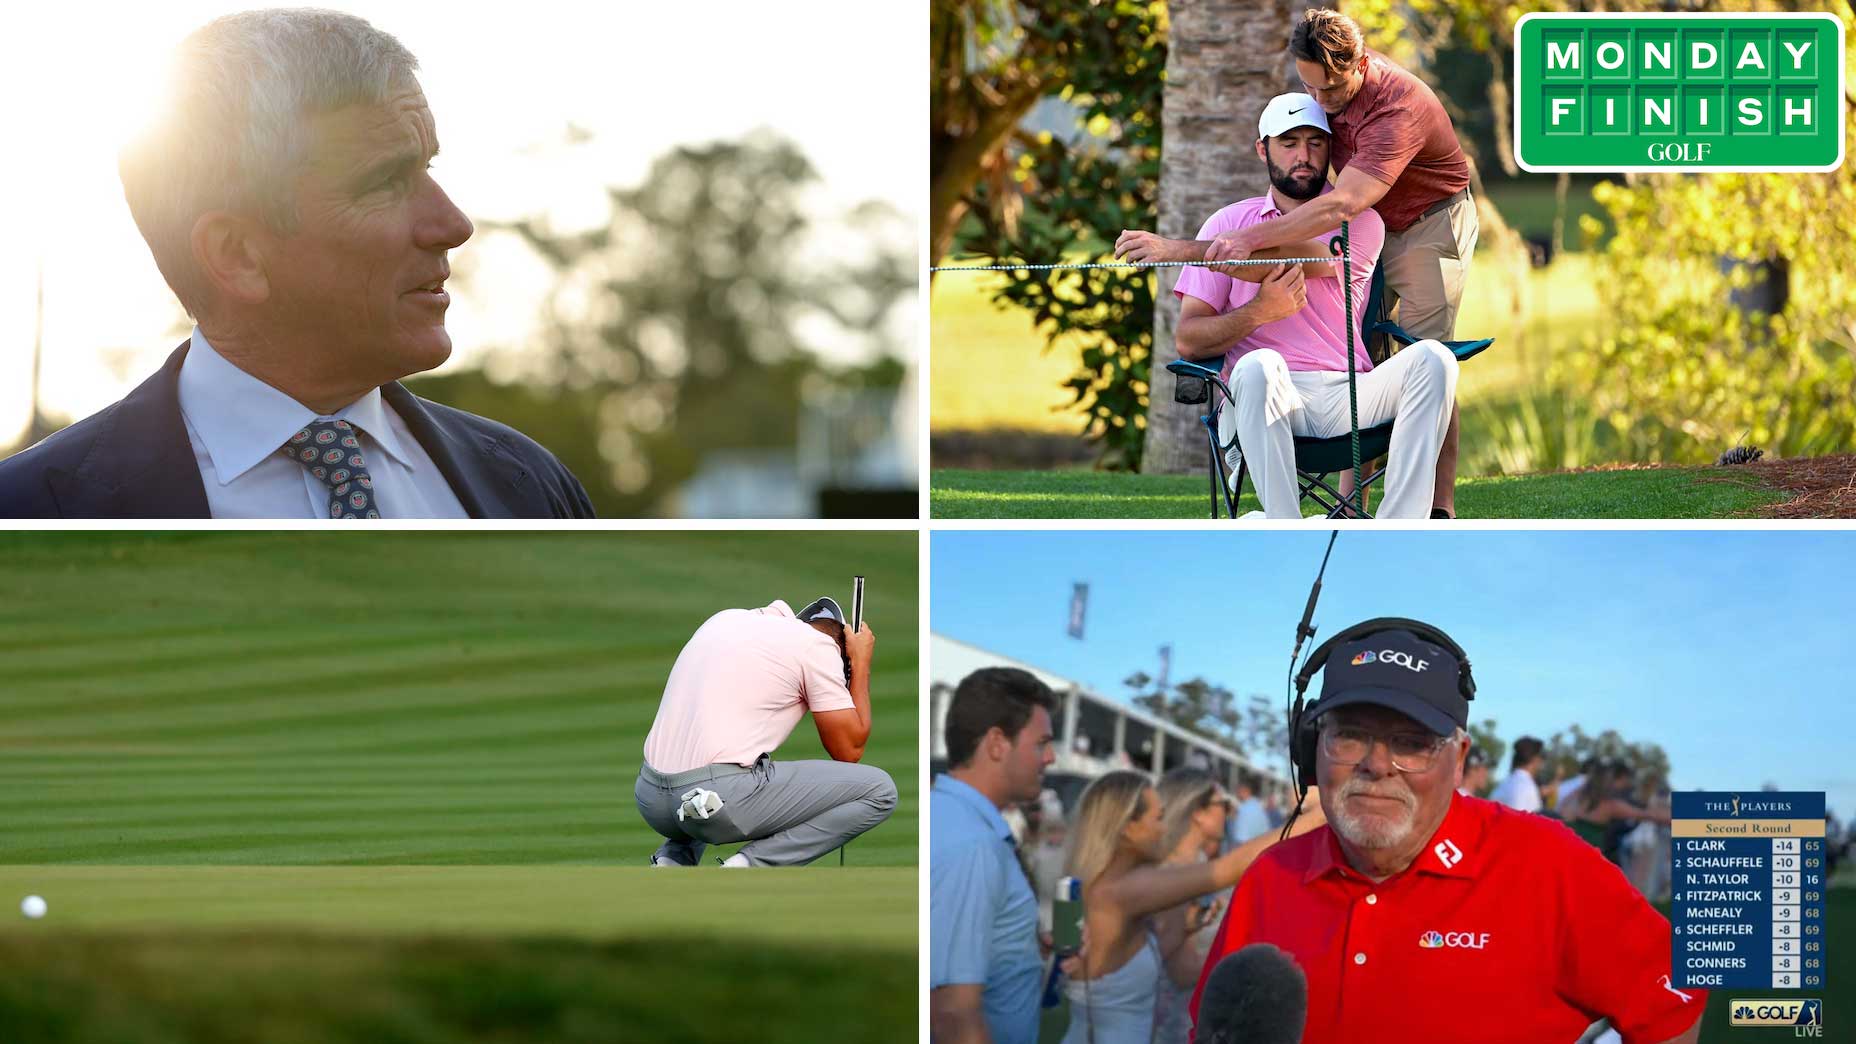 Players Championship Week had something for everybody.